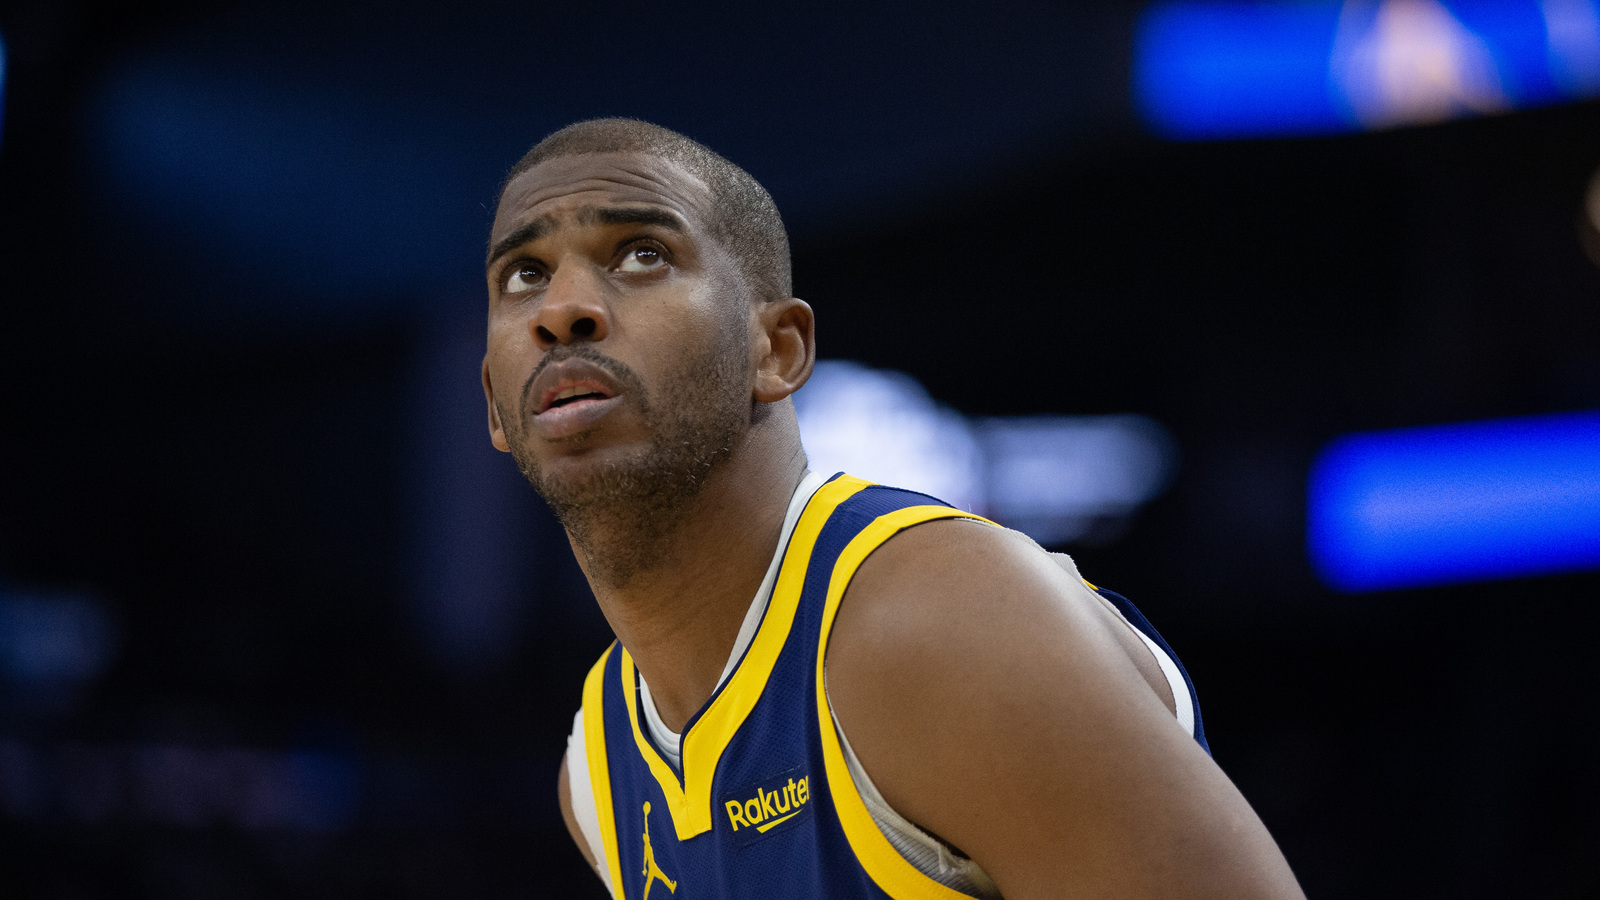 Chris Paul's contract makes him a logical trade asset for the Warriors